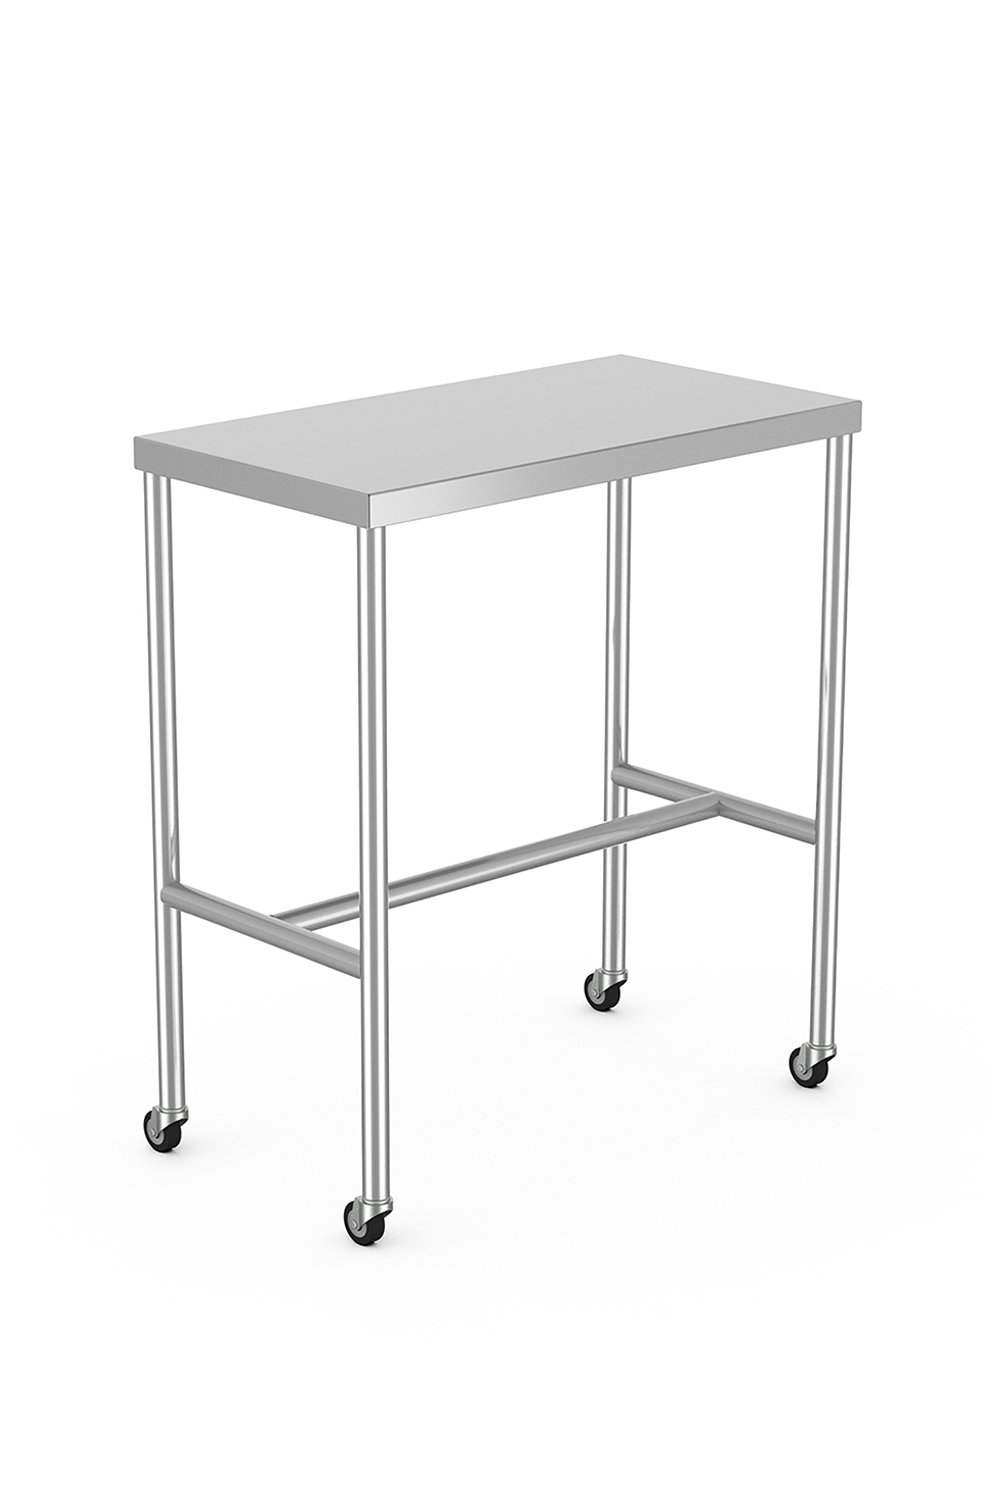 Stainless Steel Table Stainless Solutions Macmedical 16"D x 30"W x 34"H H-Brace 